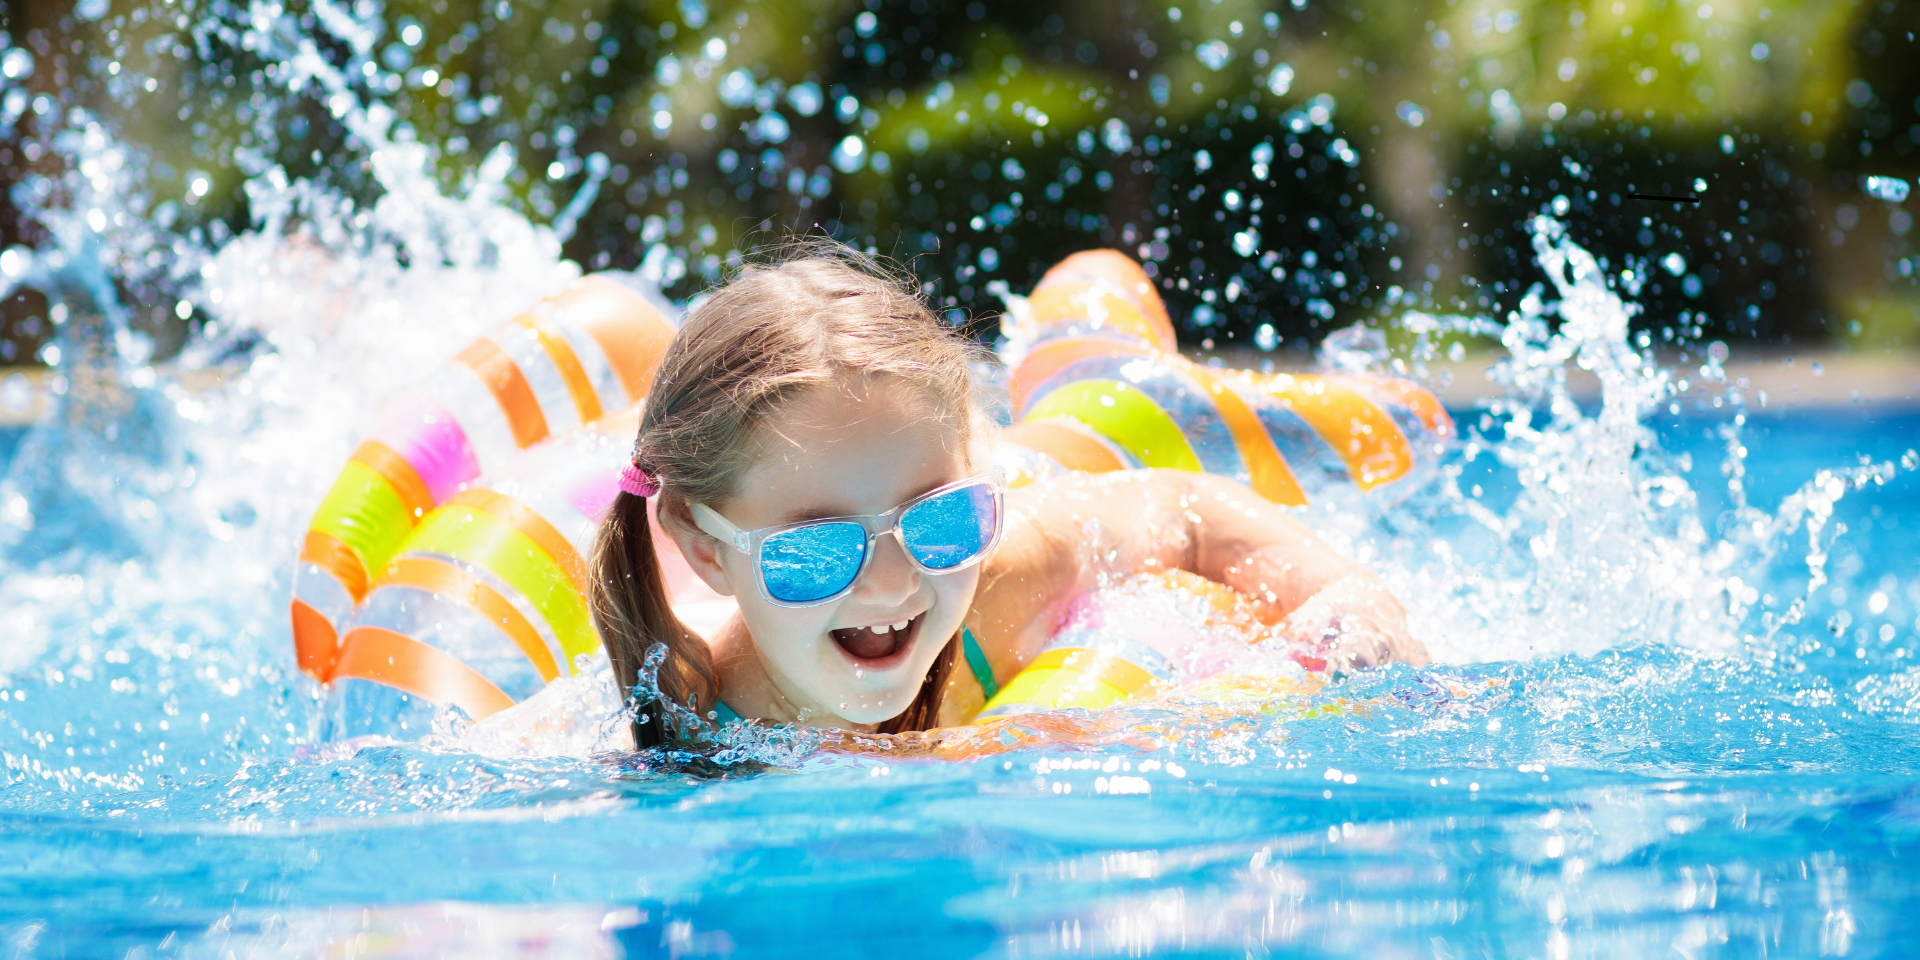 Child splashing in a pool with floatation devices and goggles